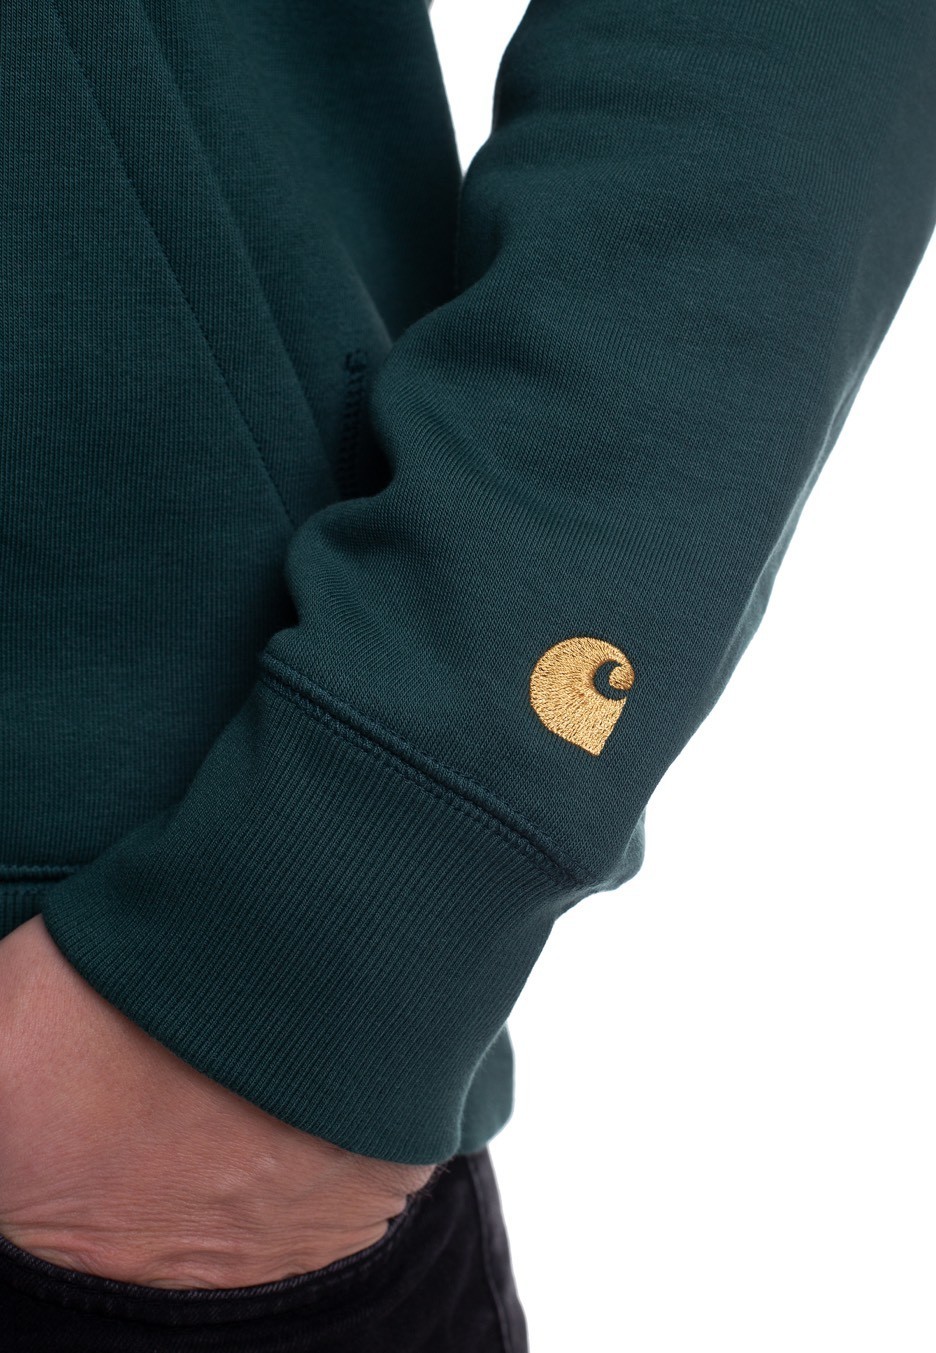 Carhartt WIP - Hooded Chase Treehouse/Gold - Hoodies